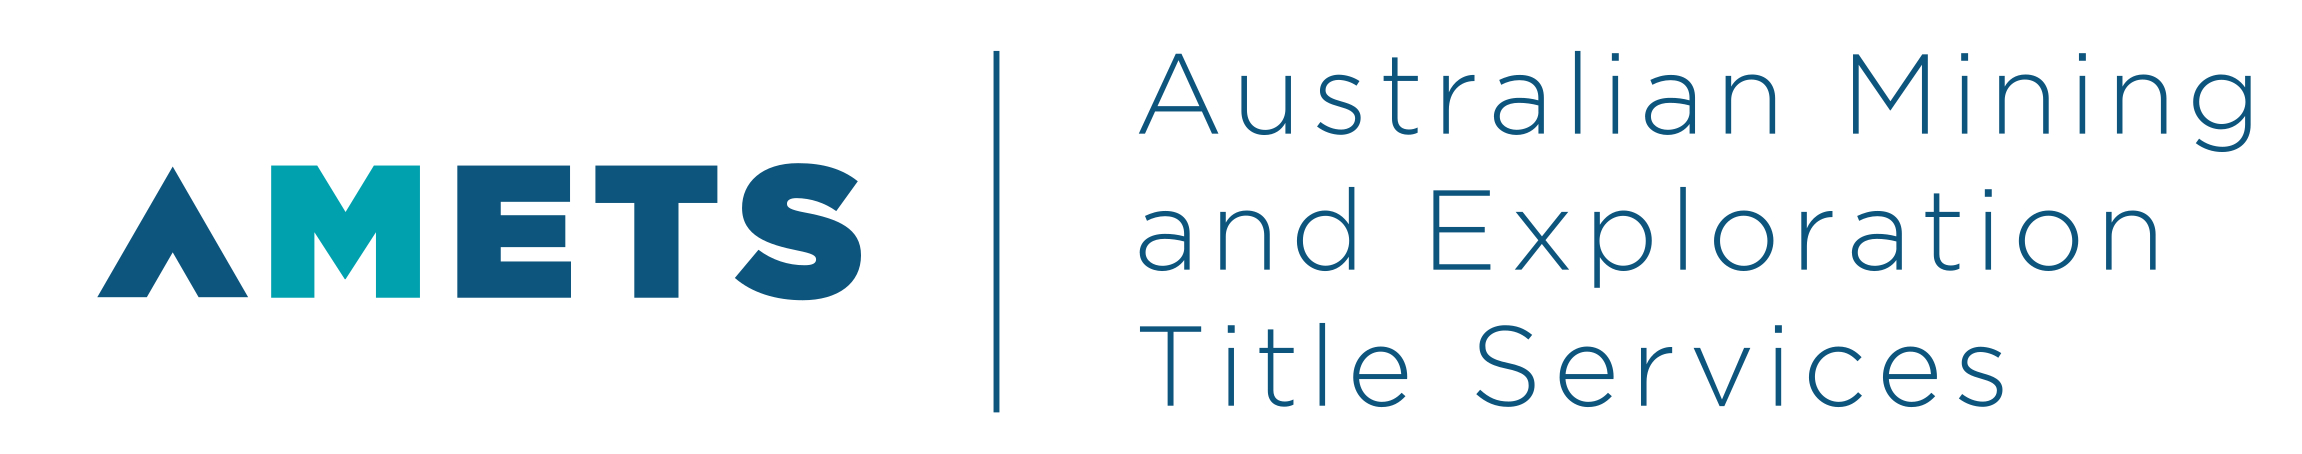 Australian Mining and Exploration Title Services